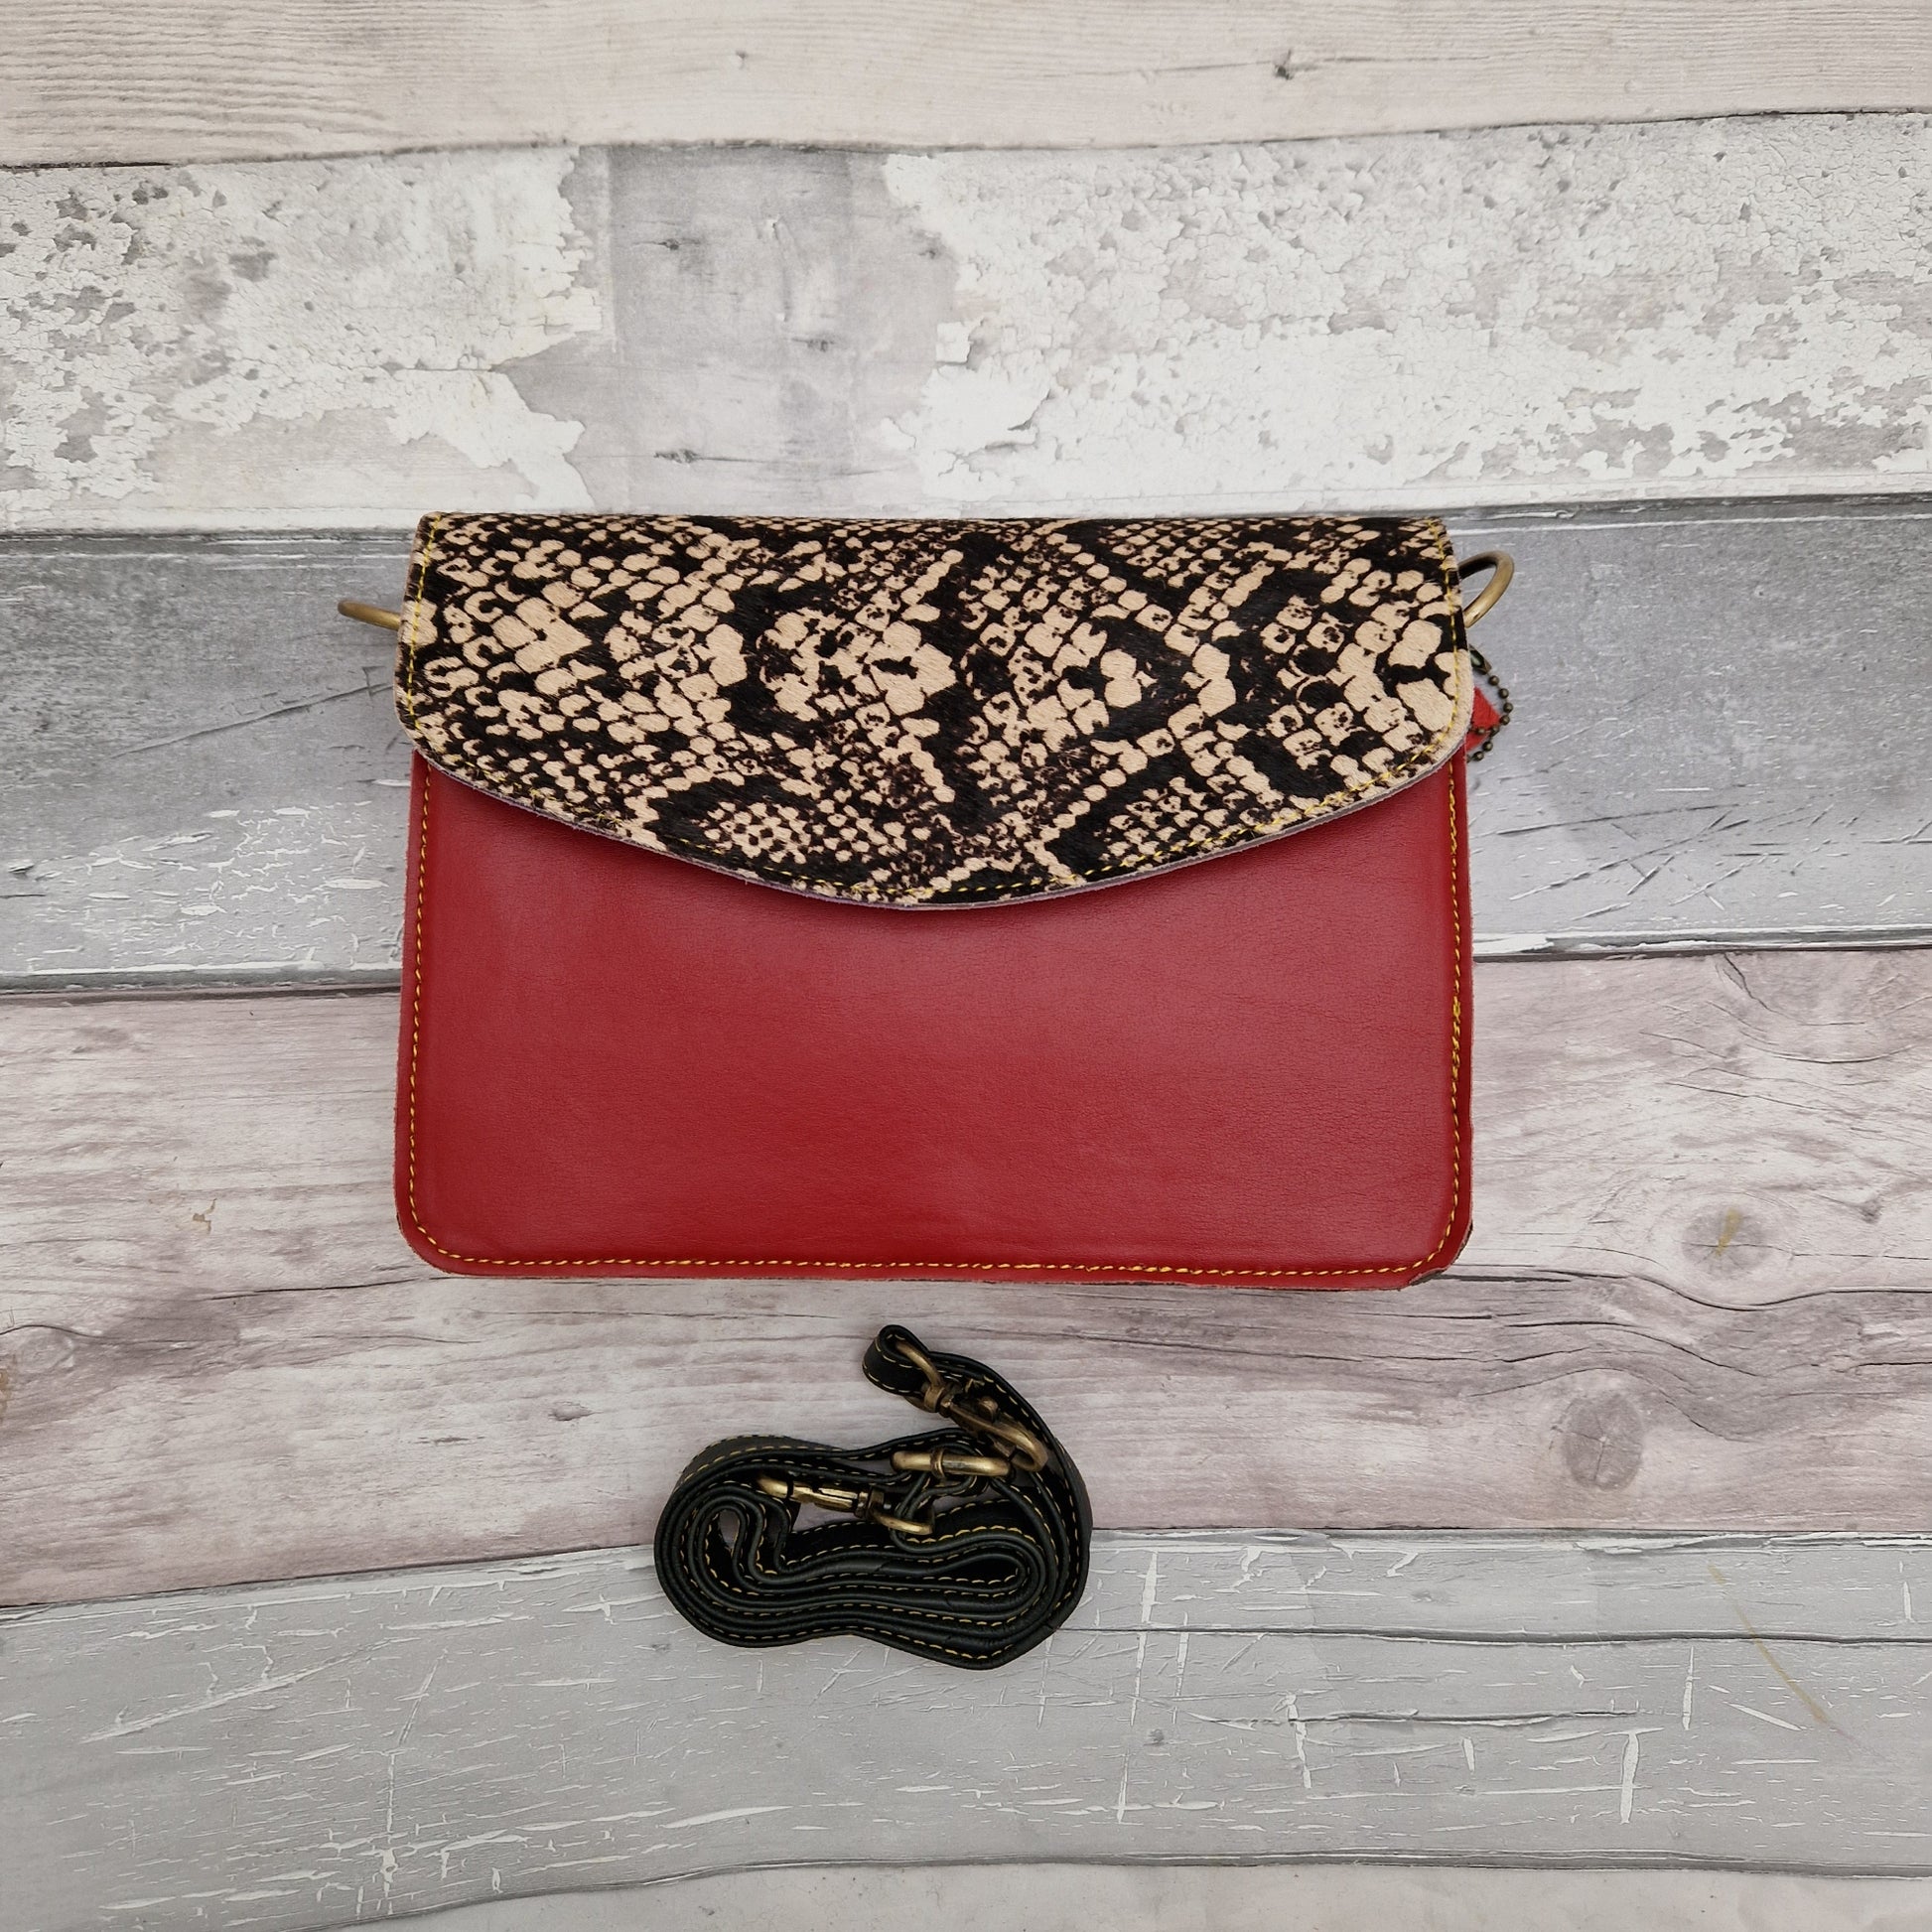 Red Leather clutch bag with a snakeskin print textured envelope style panel.